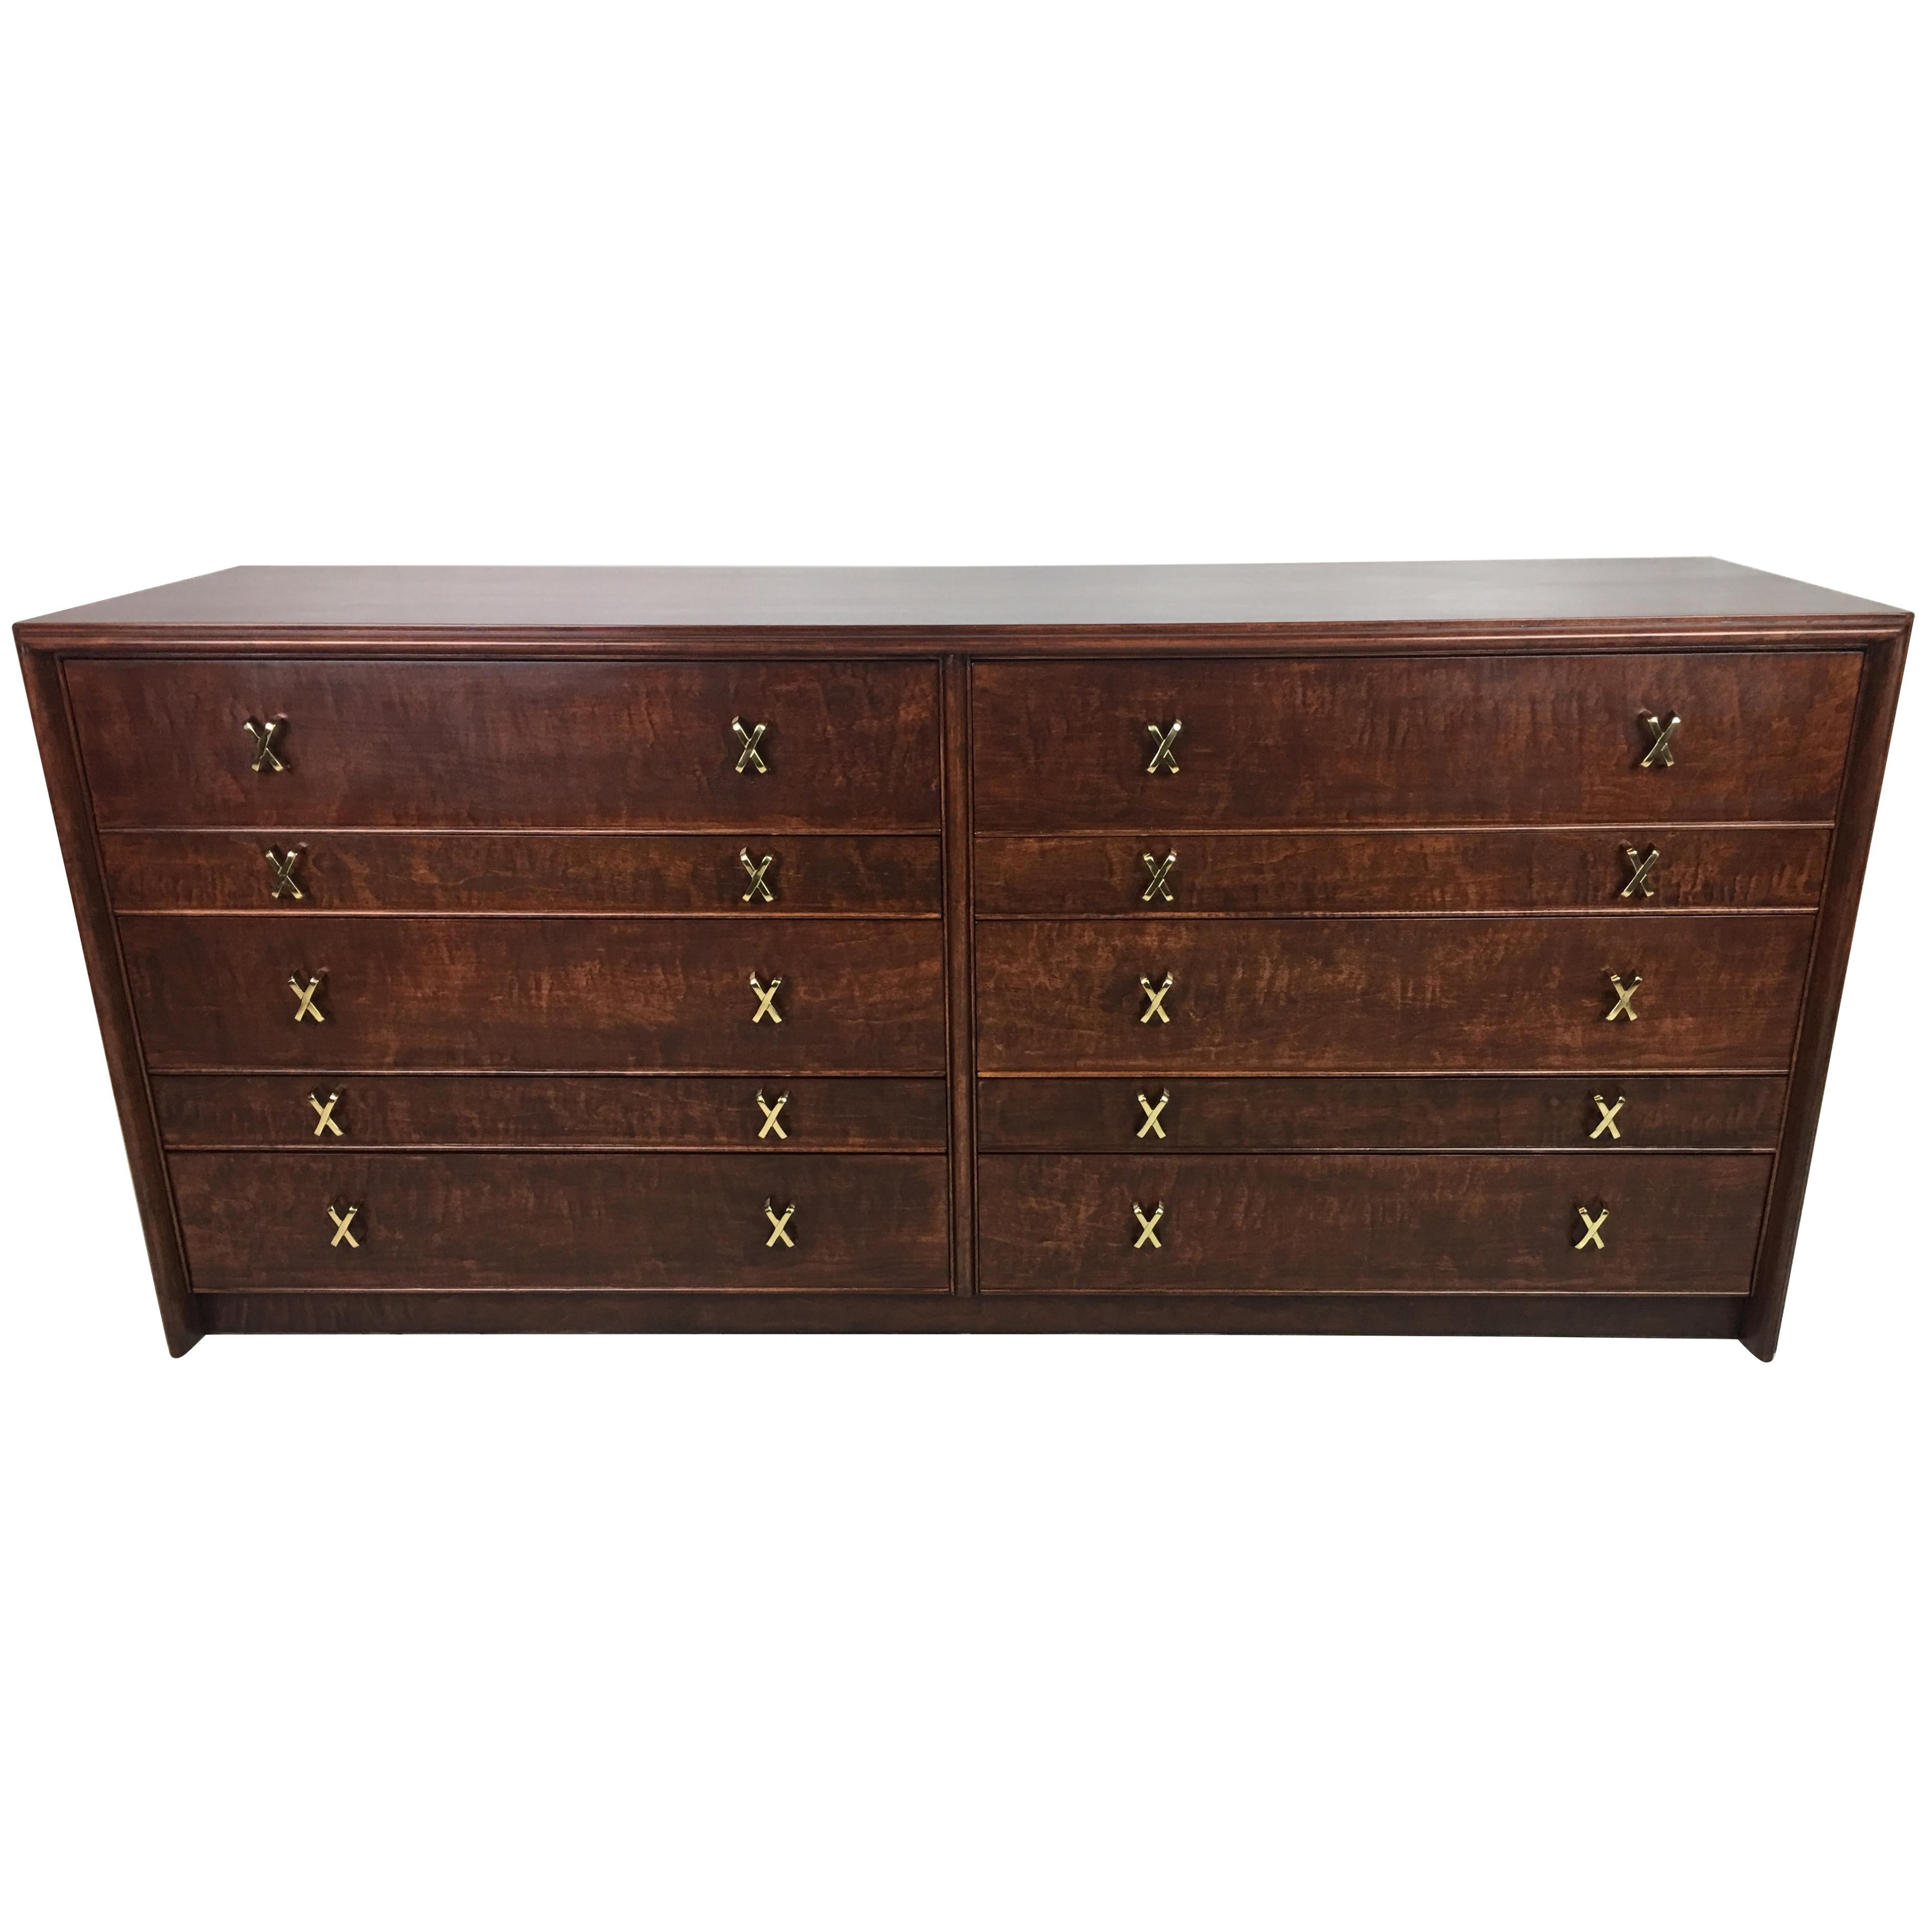 Fantastic Curly Maple Dresser by Paul Frankl for Johnson Furniture